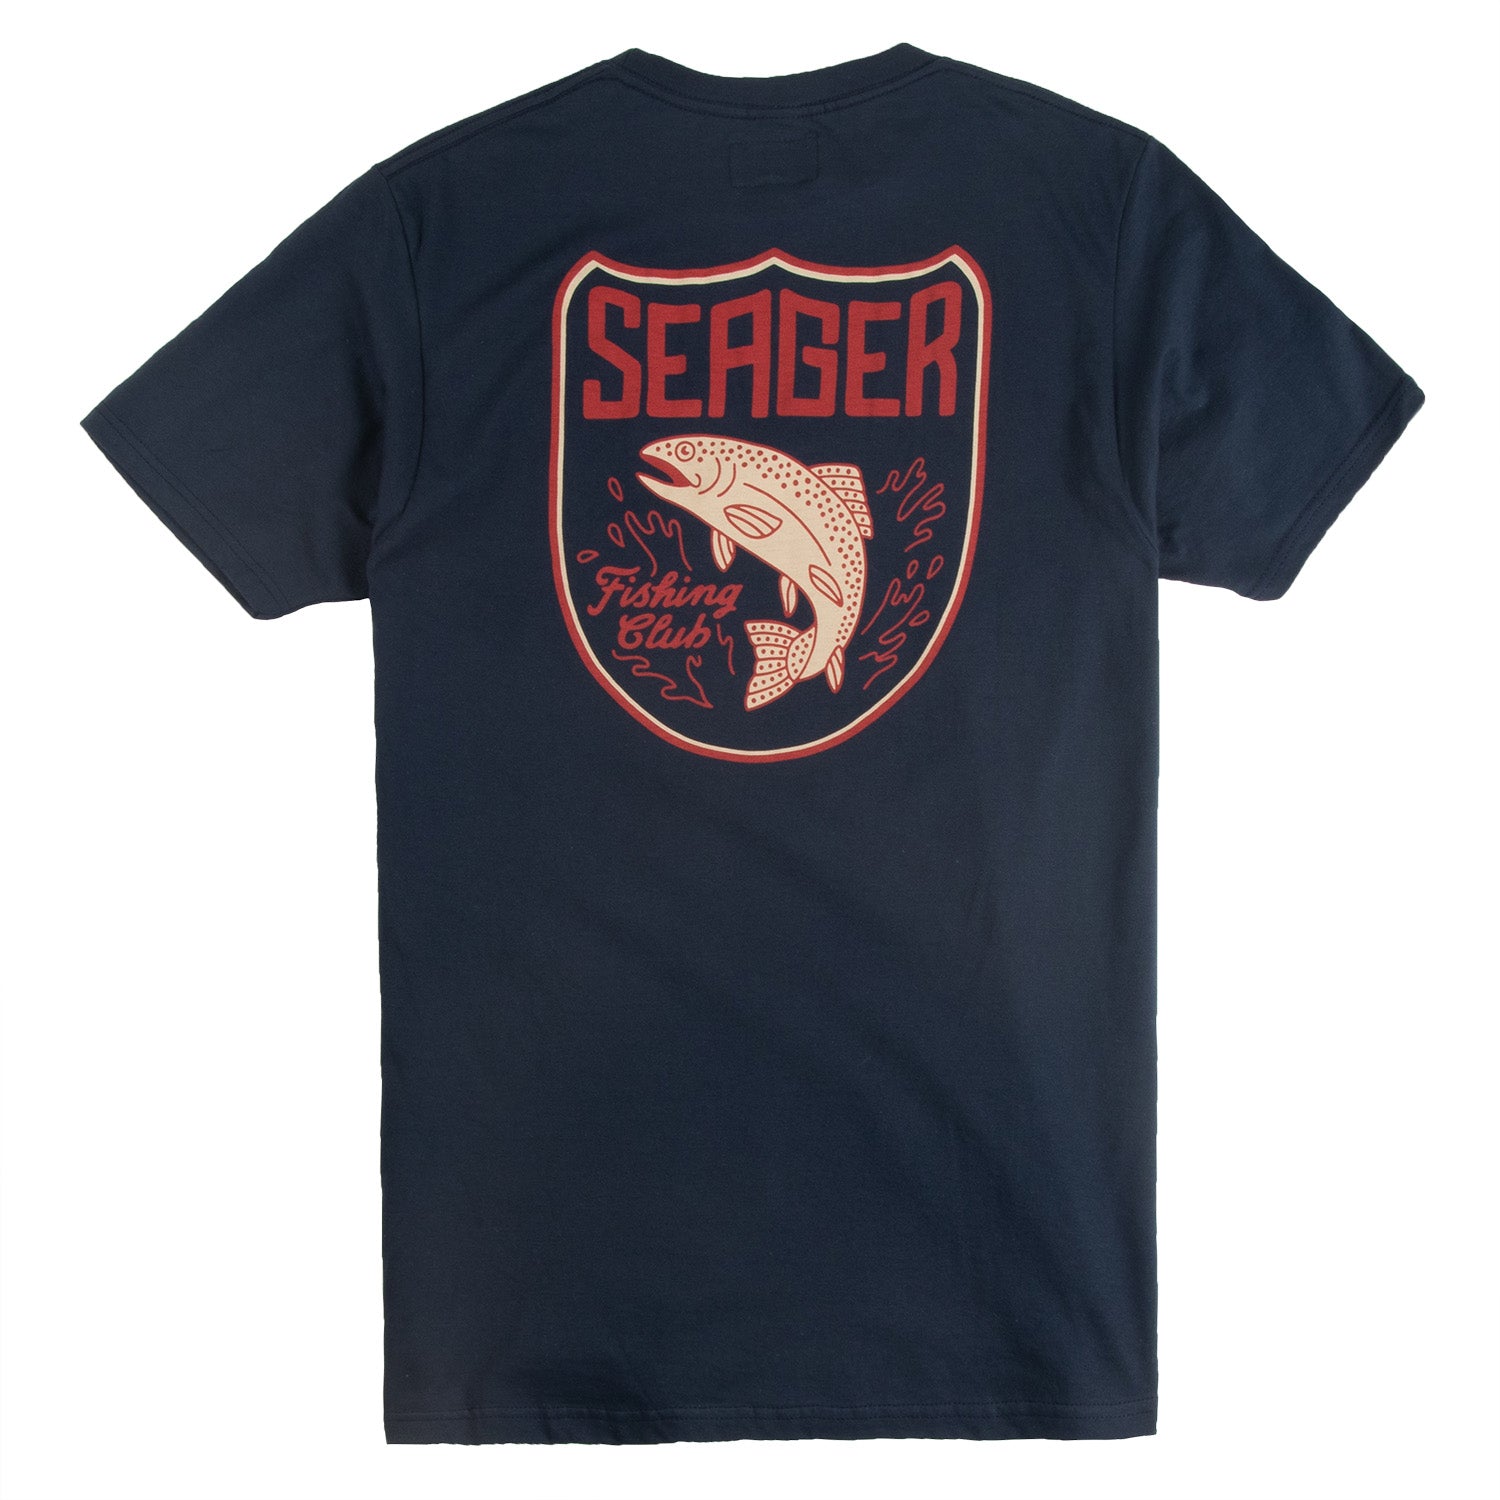 Fishing Club Tee Navy - Western Inspired, Premium Graphic T-Shirt Made with 100% Cotton Seager Co., S